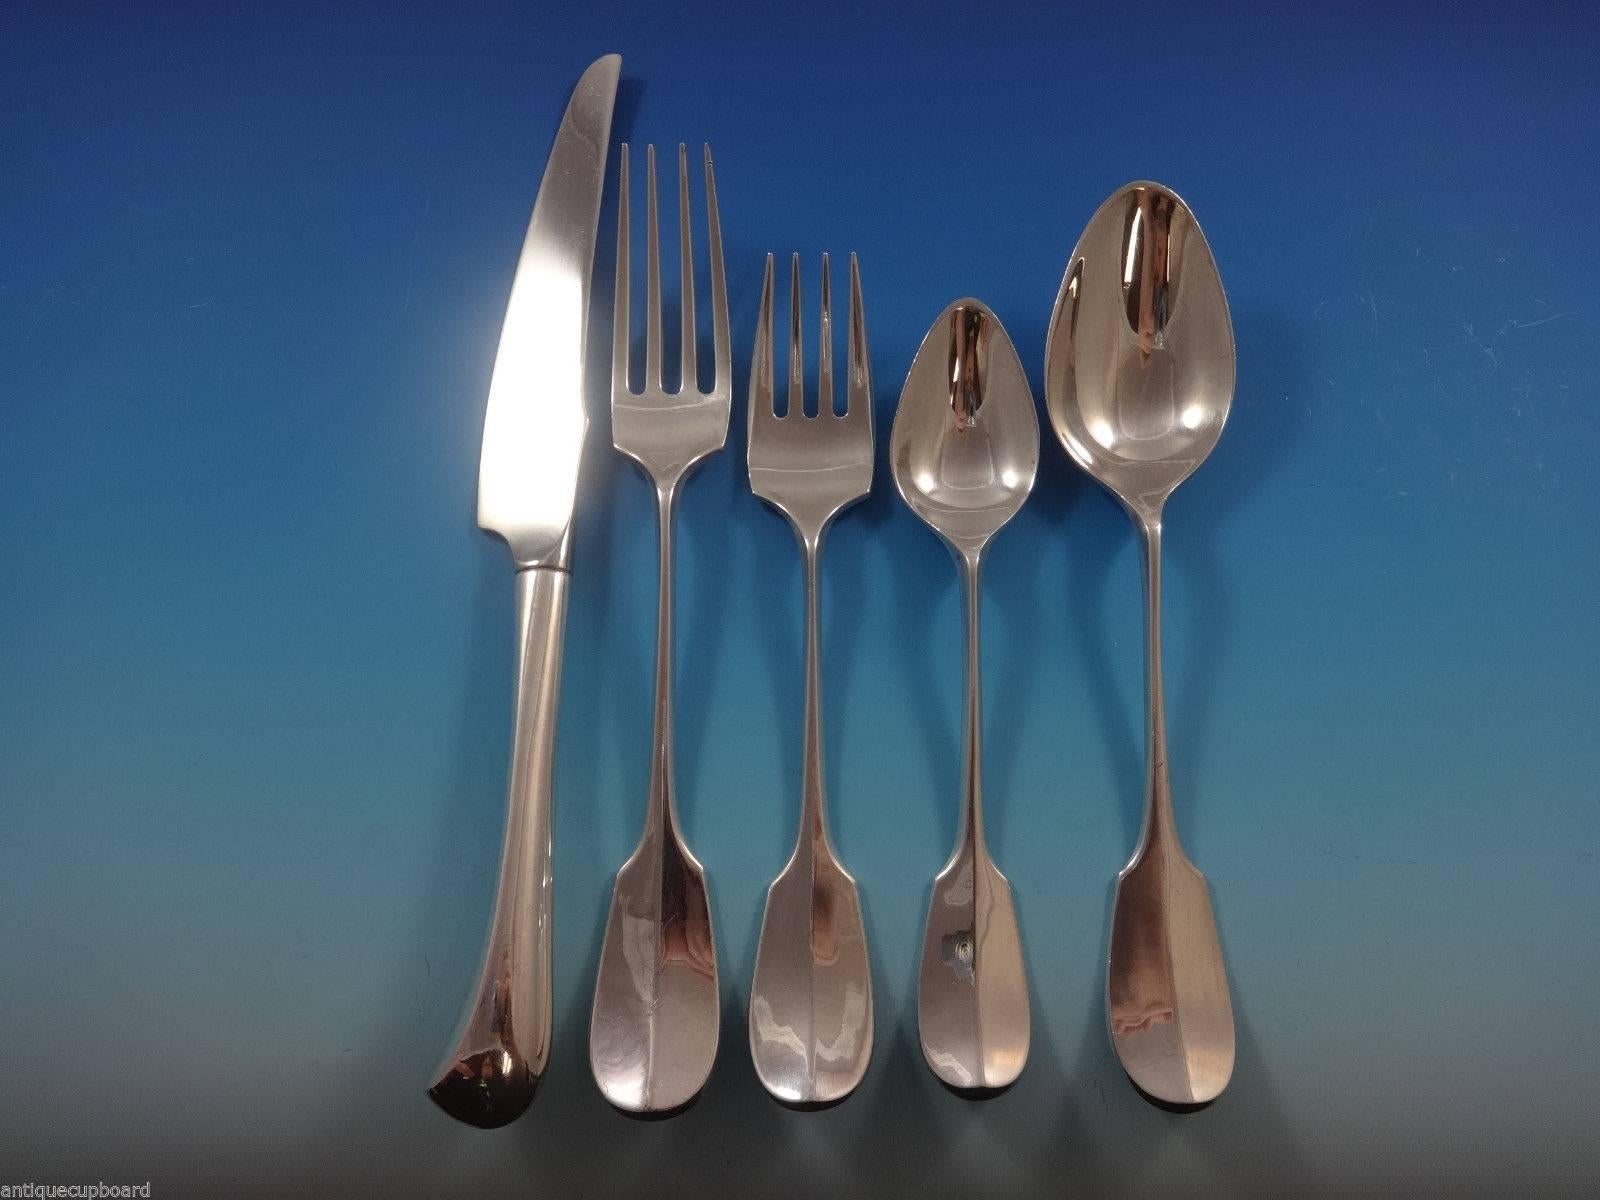 An impressive pattern “Smithsonian” is one of Stieff's heaviest sets of tableware. The design of this pattern is timeless.

Fabulous Smithsonian by Kirk-Stieff sterling silver flatware set, 62 pieces. This set includes:

12 dinner knives, 9